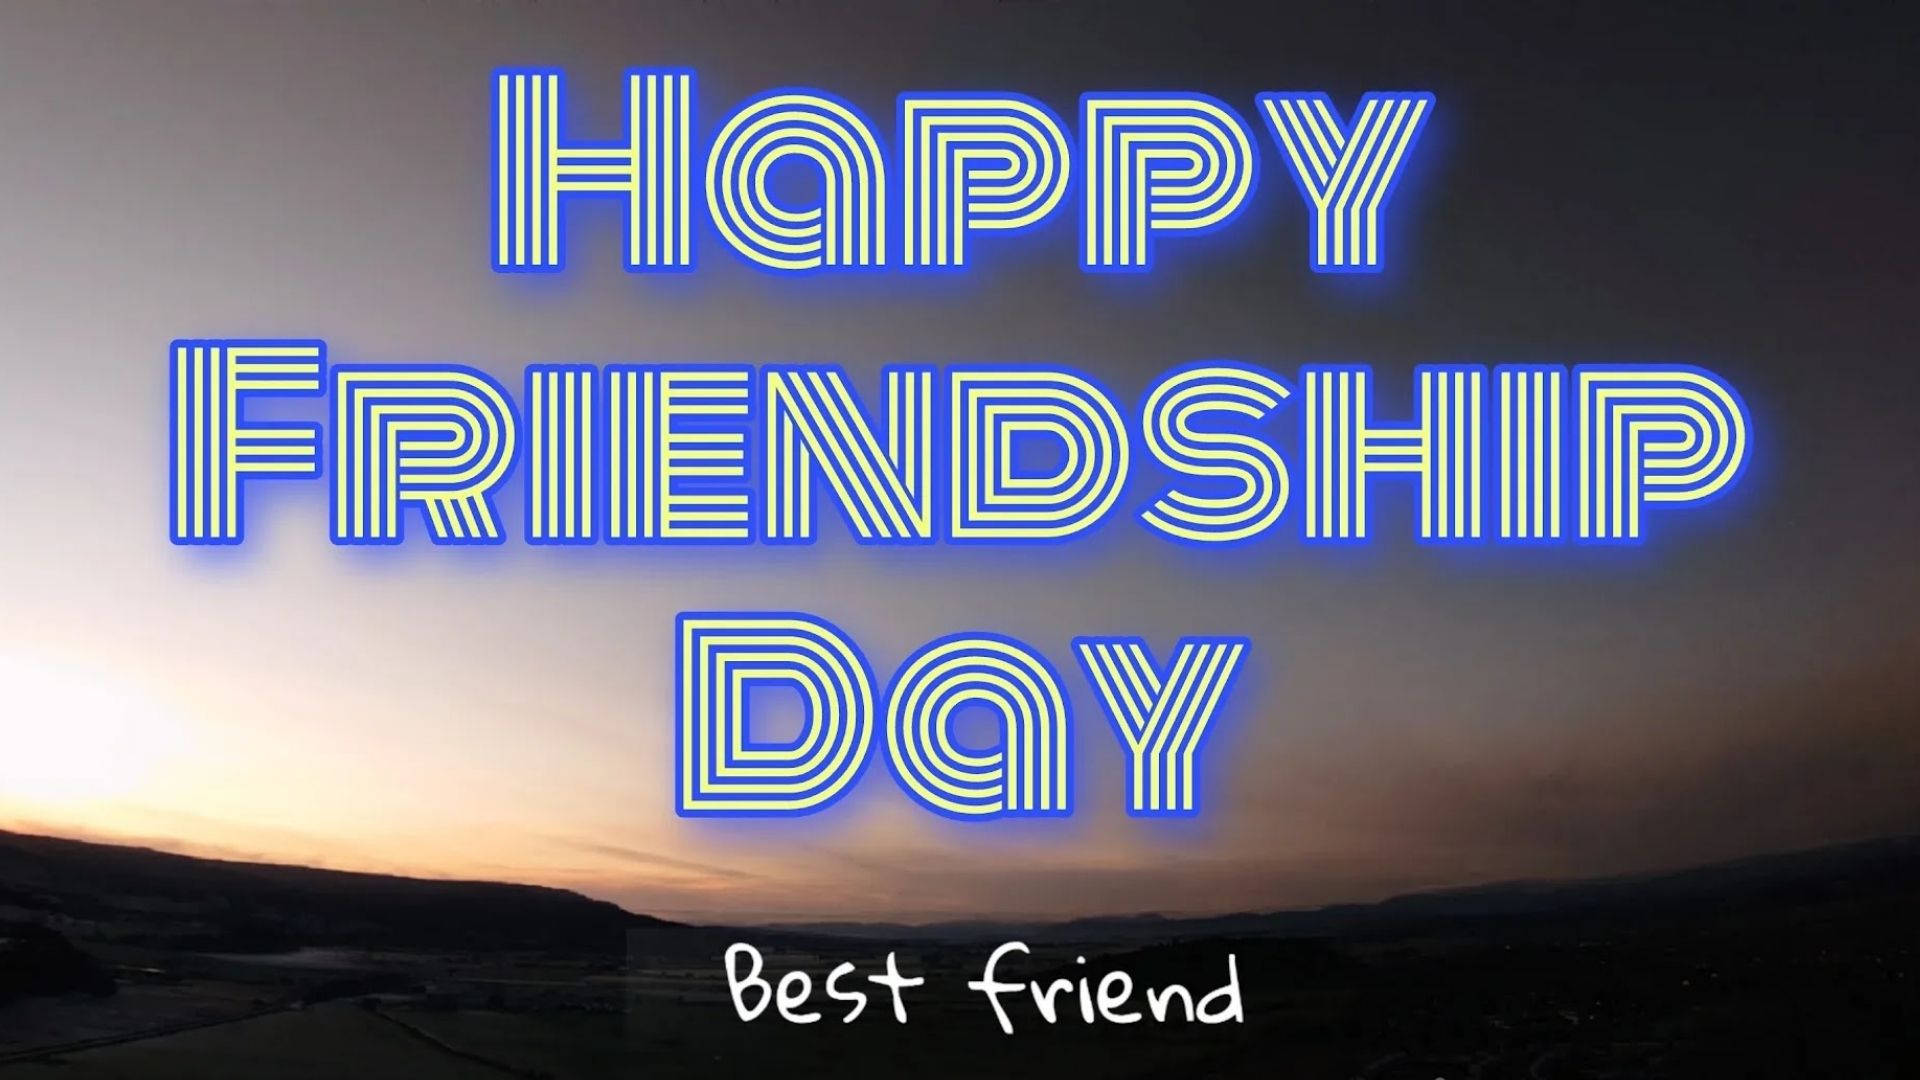 Friendship Day Greeting In The Sky Wallpaper